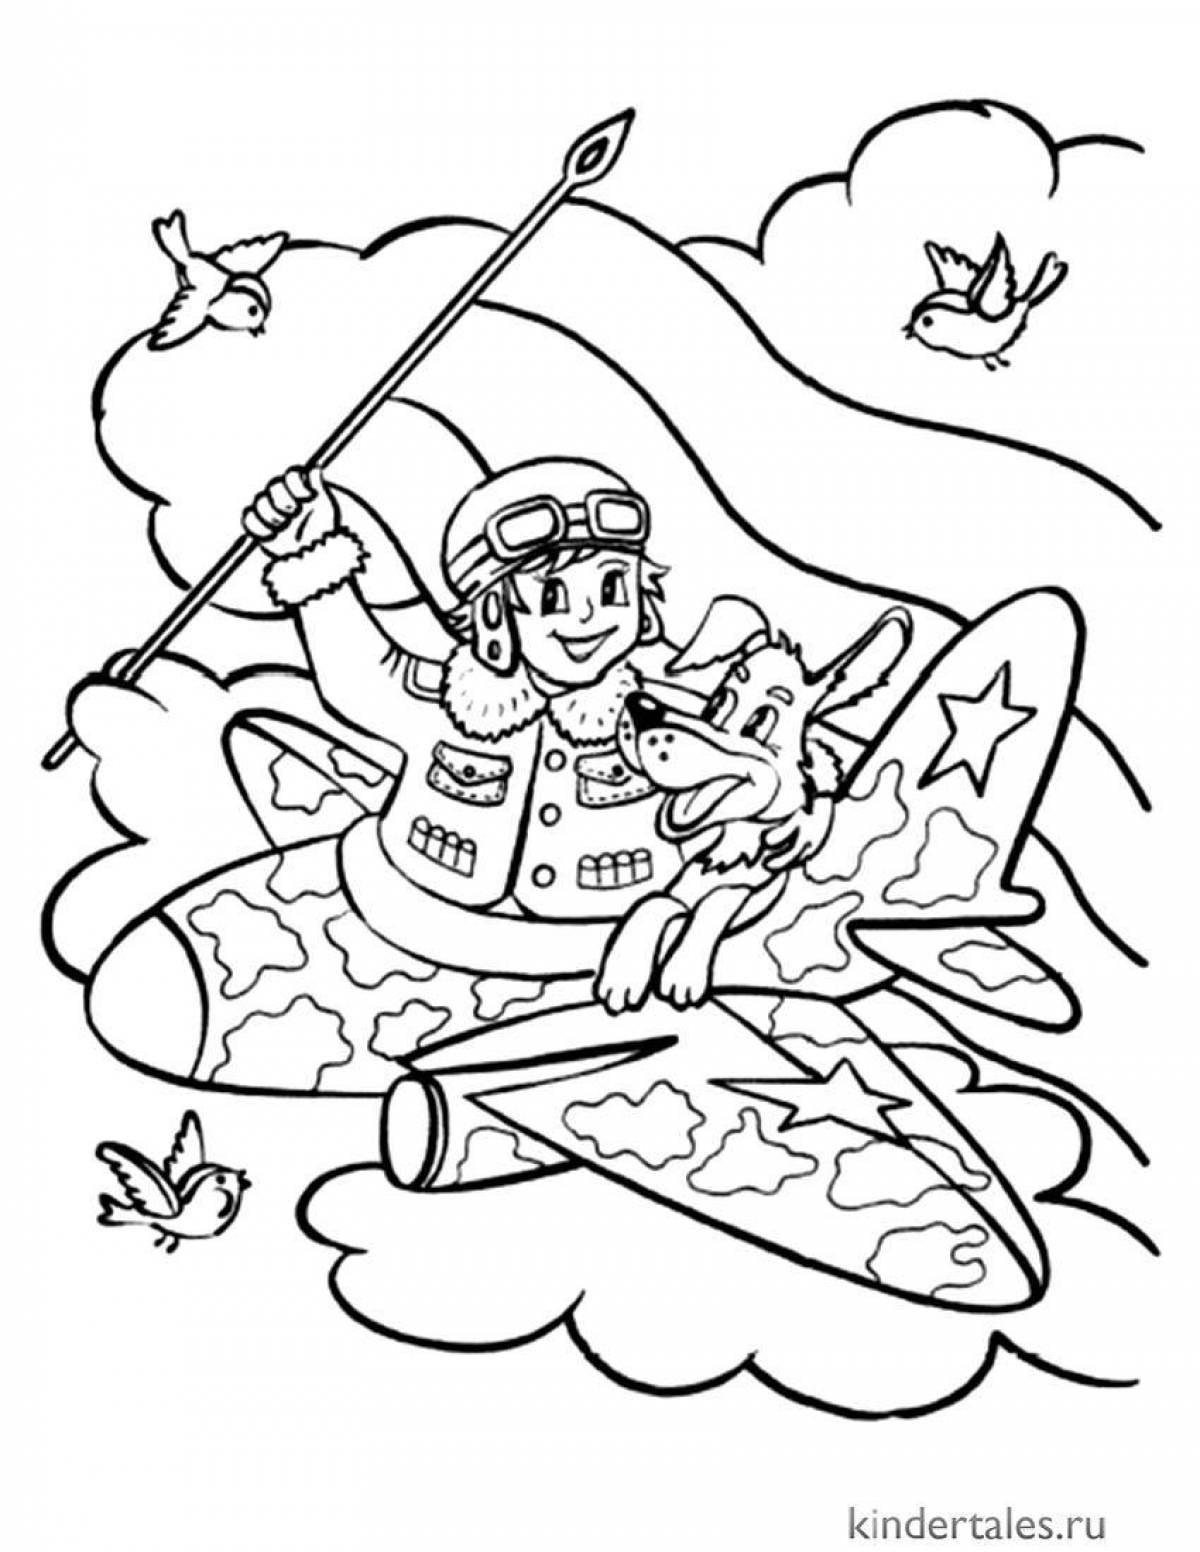 Colorful 5th grade military coloring book